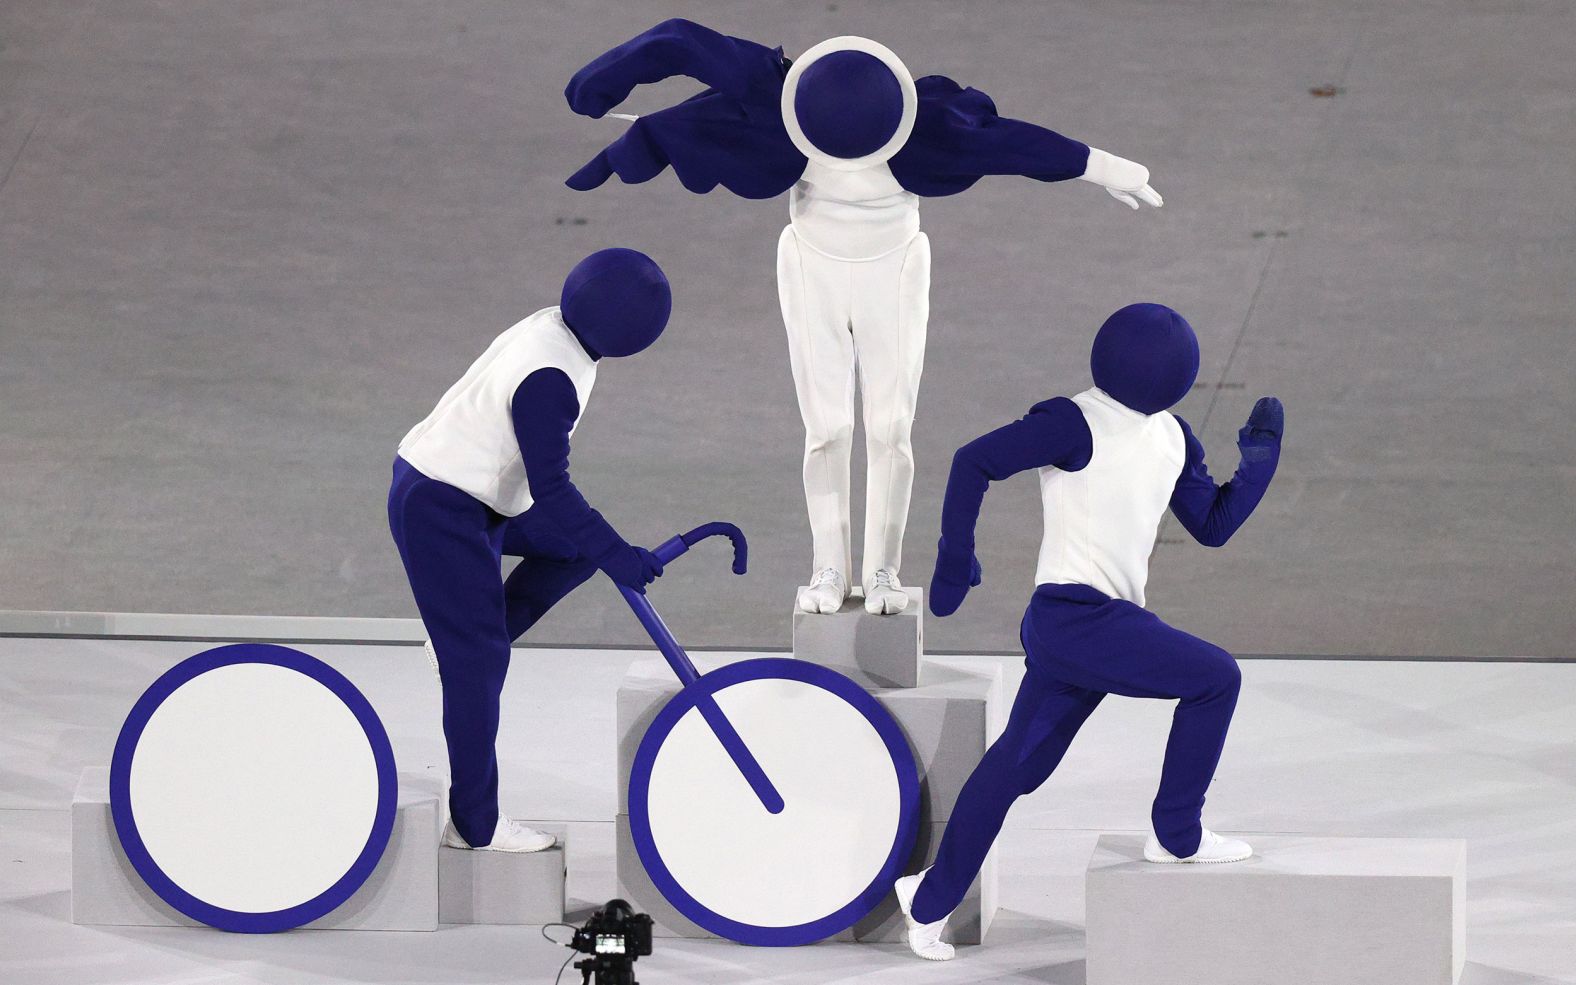 Live performers pose as the triathlon pictogram during the opening ceremony. There were 50 sports taking place this year in the Tokyo Olympics, and all of their <a href="index.php?page=&url=https%3A%2F%2Folympics.com%2Fen%2Fnews%2Ftokyo-2020-unveils-games-pictograms" target="_blank" target="_blank">pictograms</a> were acted out by the performers.